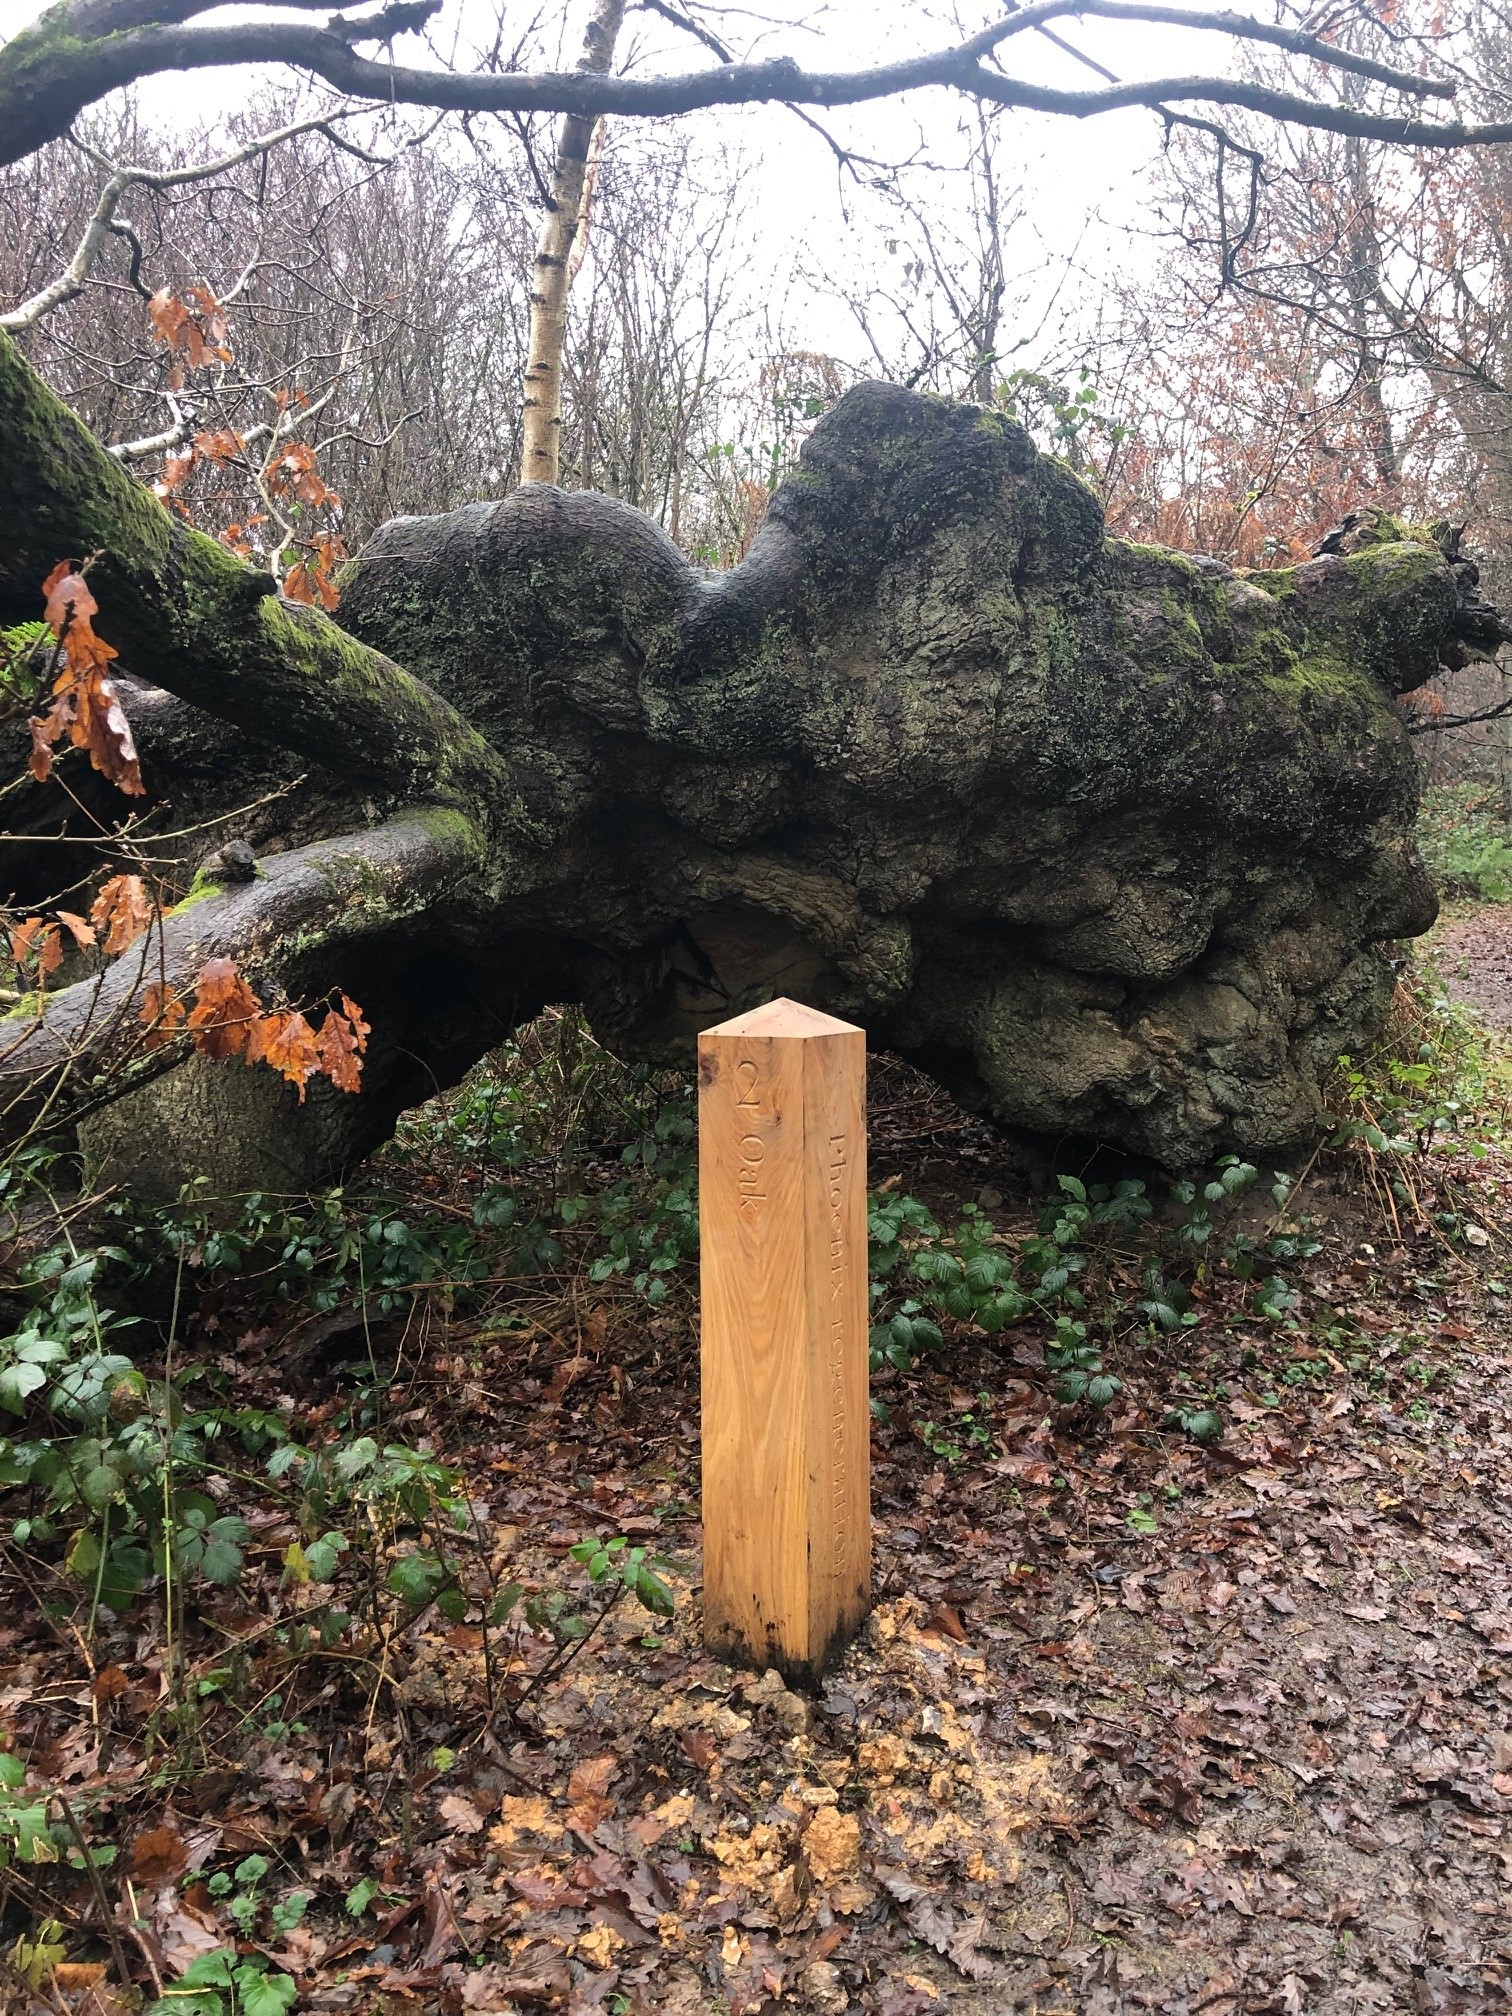 Timber post next to large veteran tree on its side